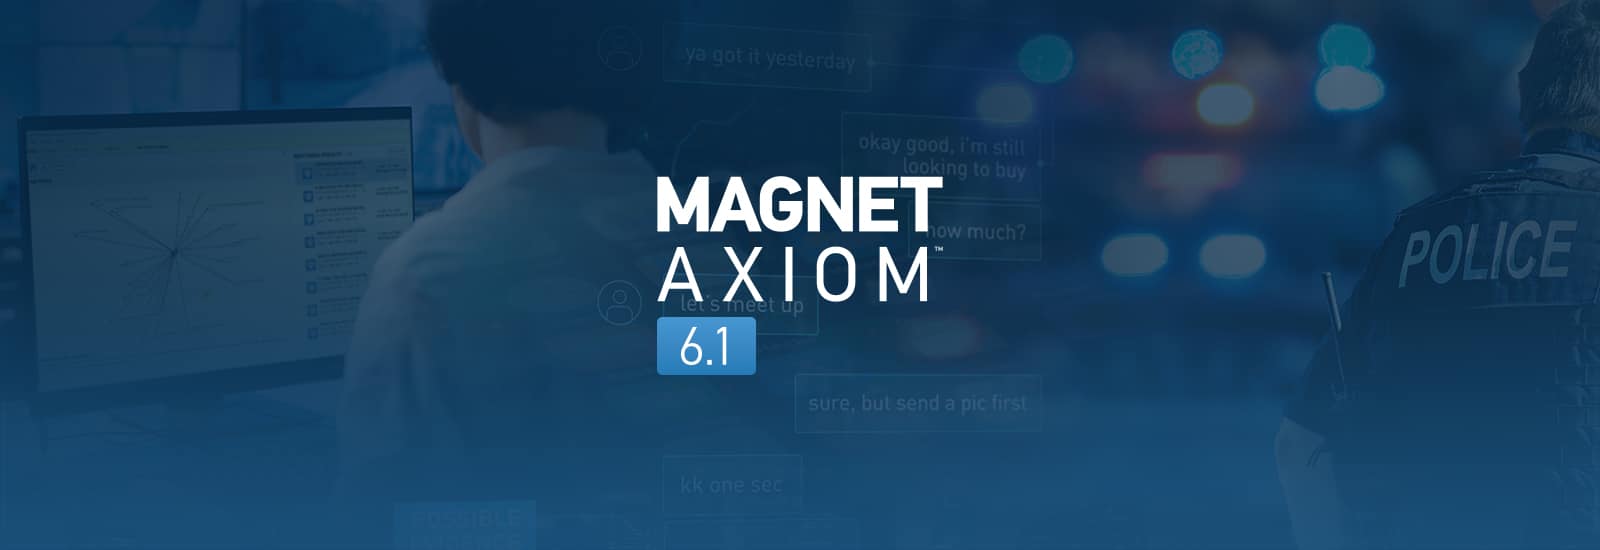 A decorative header for the release of Magnet AXIOM 6.1